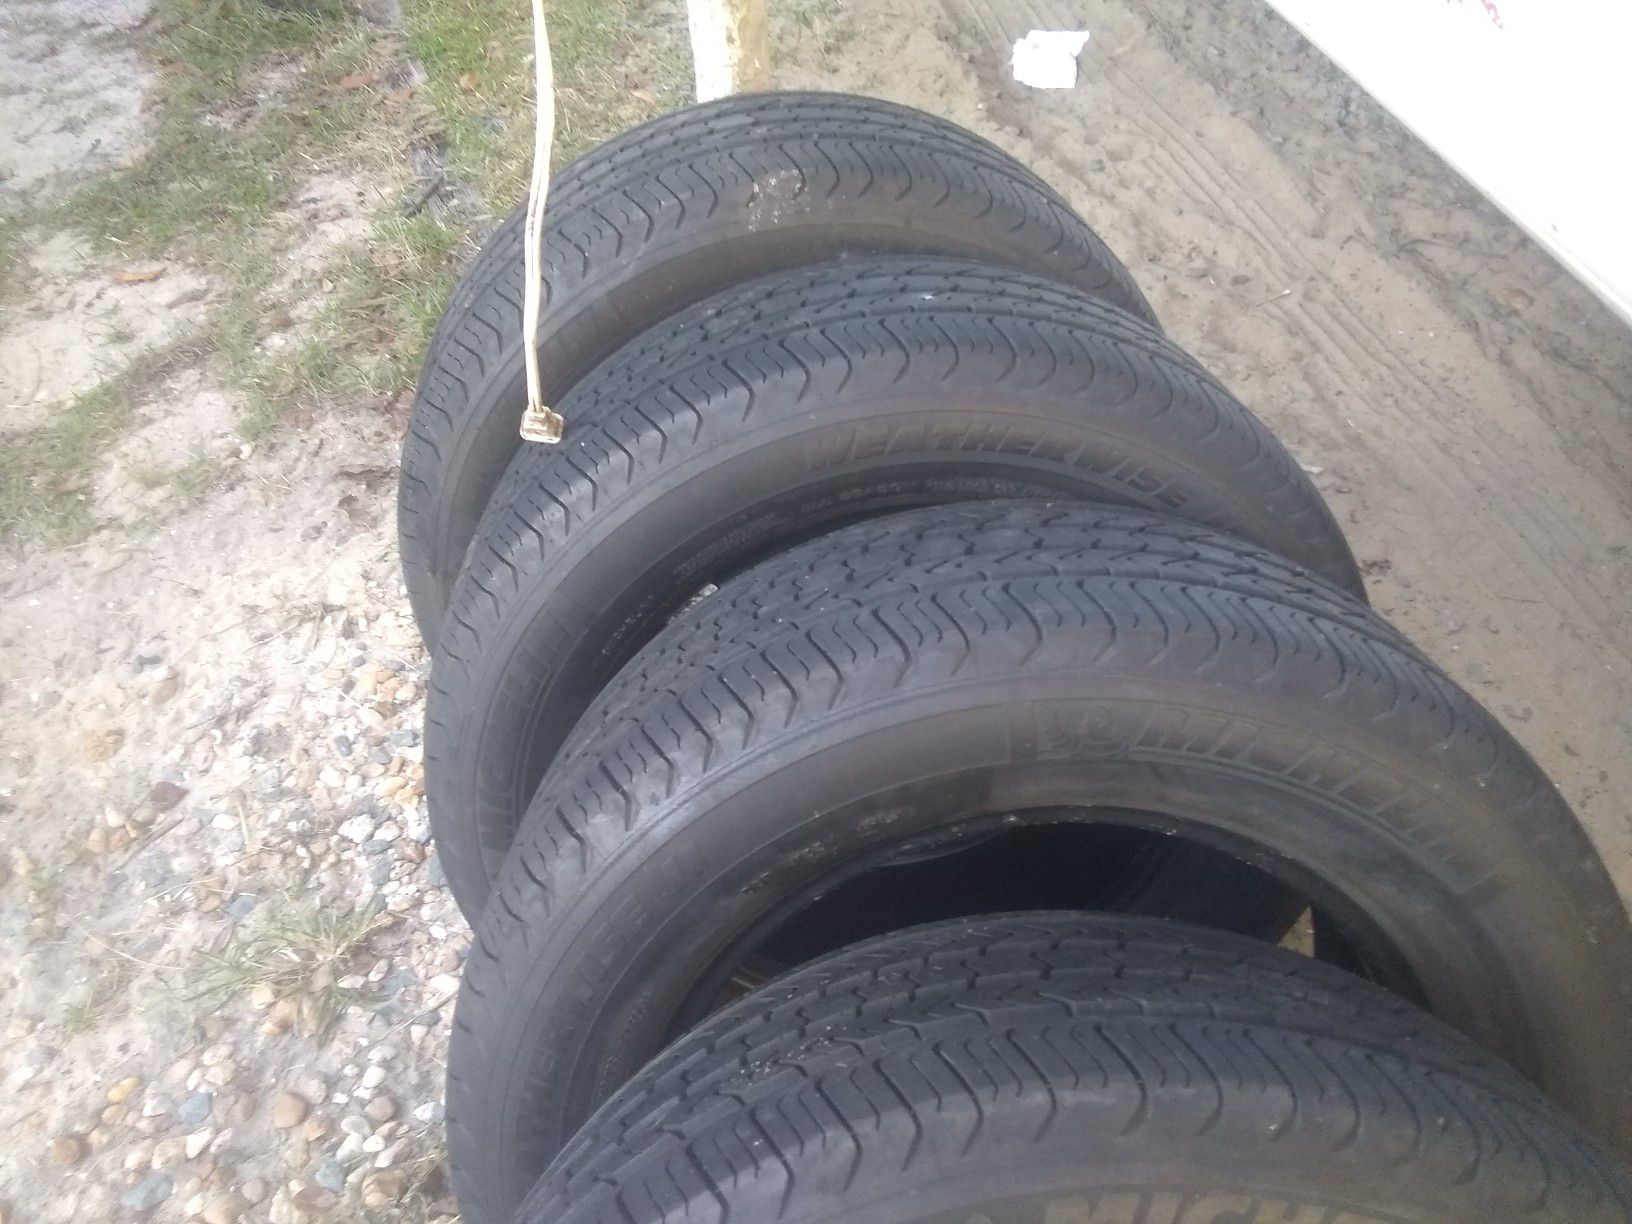 Set of 4 225/60/16 inch Michelin tires in good condition with about 70% tread left on them